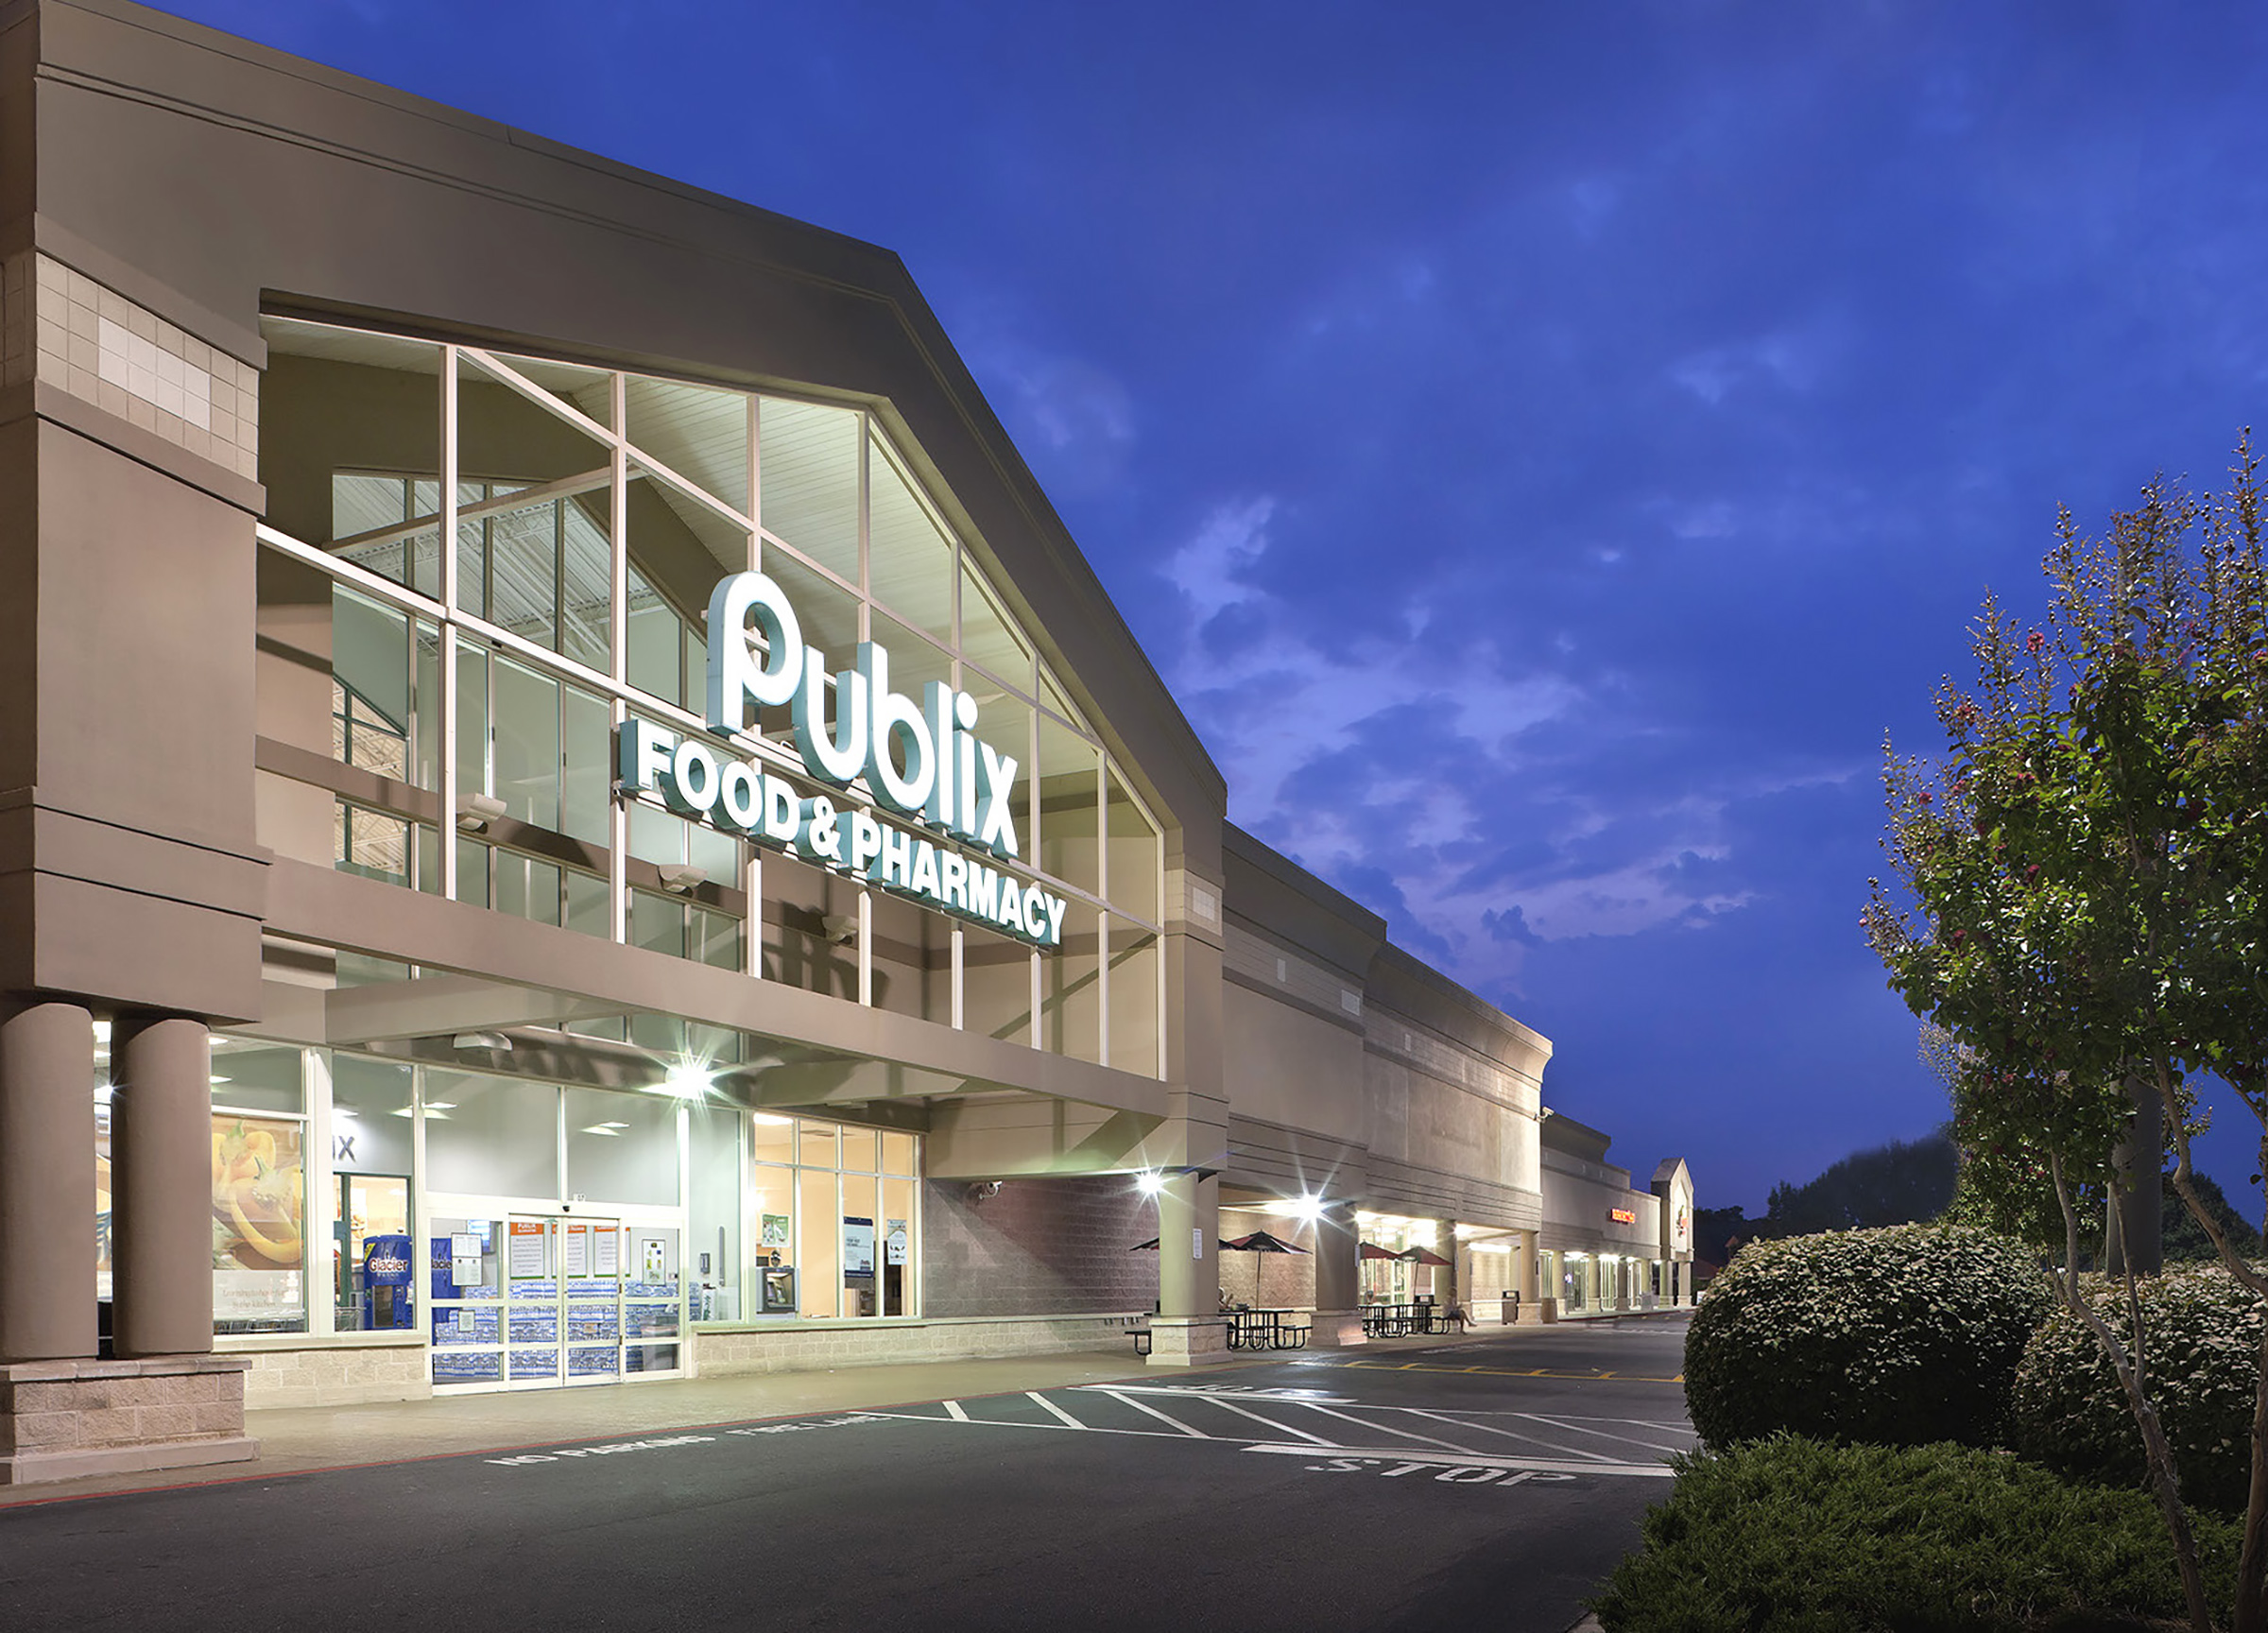 Hanley Investment Group Completes Sale of Publix-anchored Shopping Center in Atlanta Metro for $24.6 Million